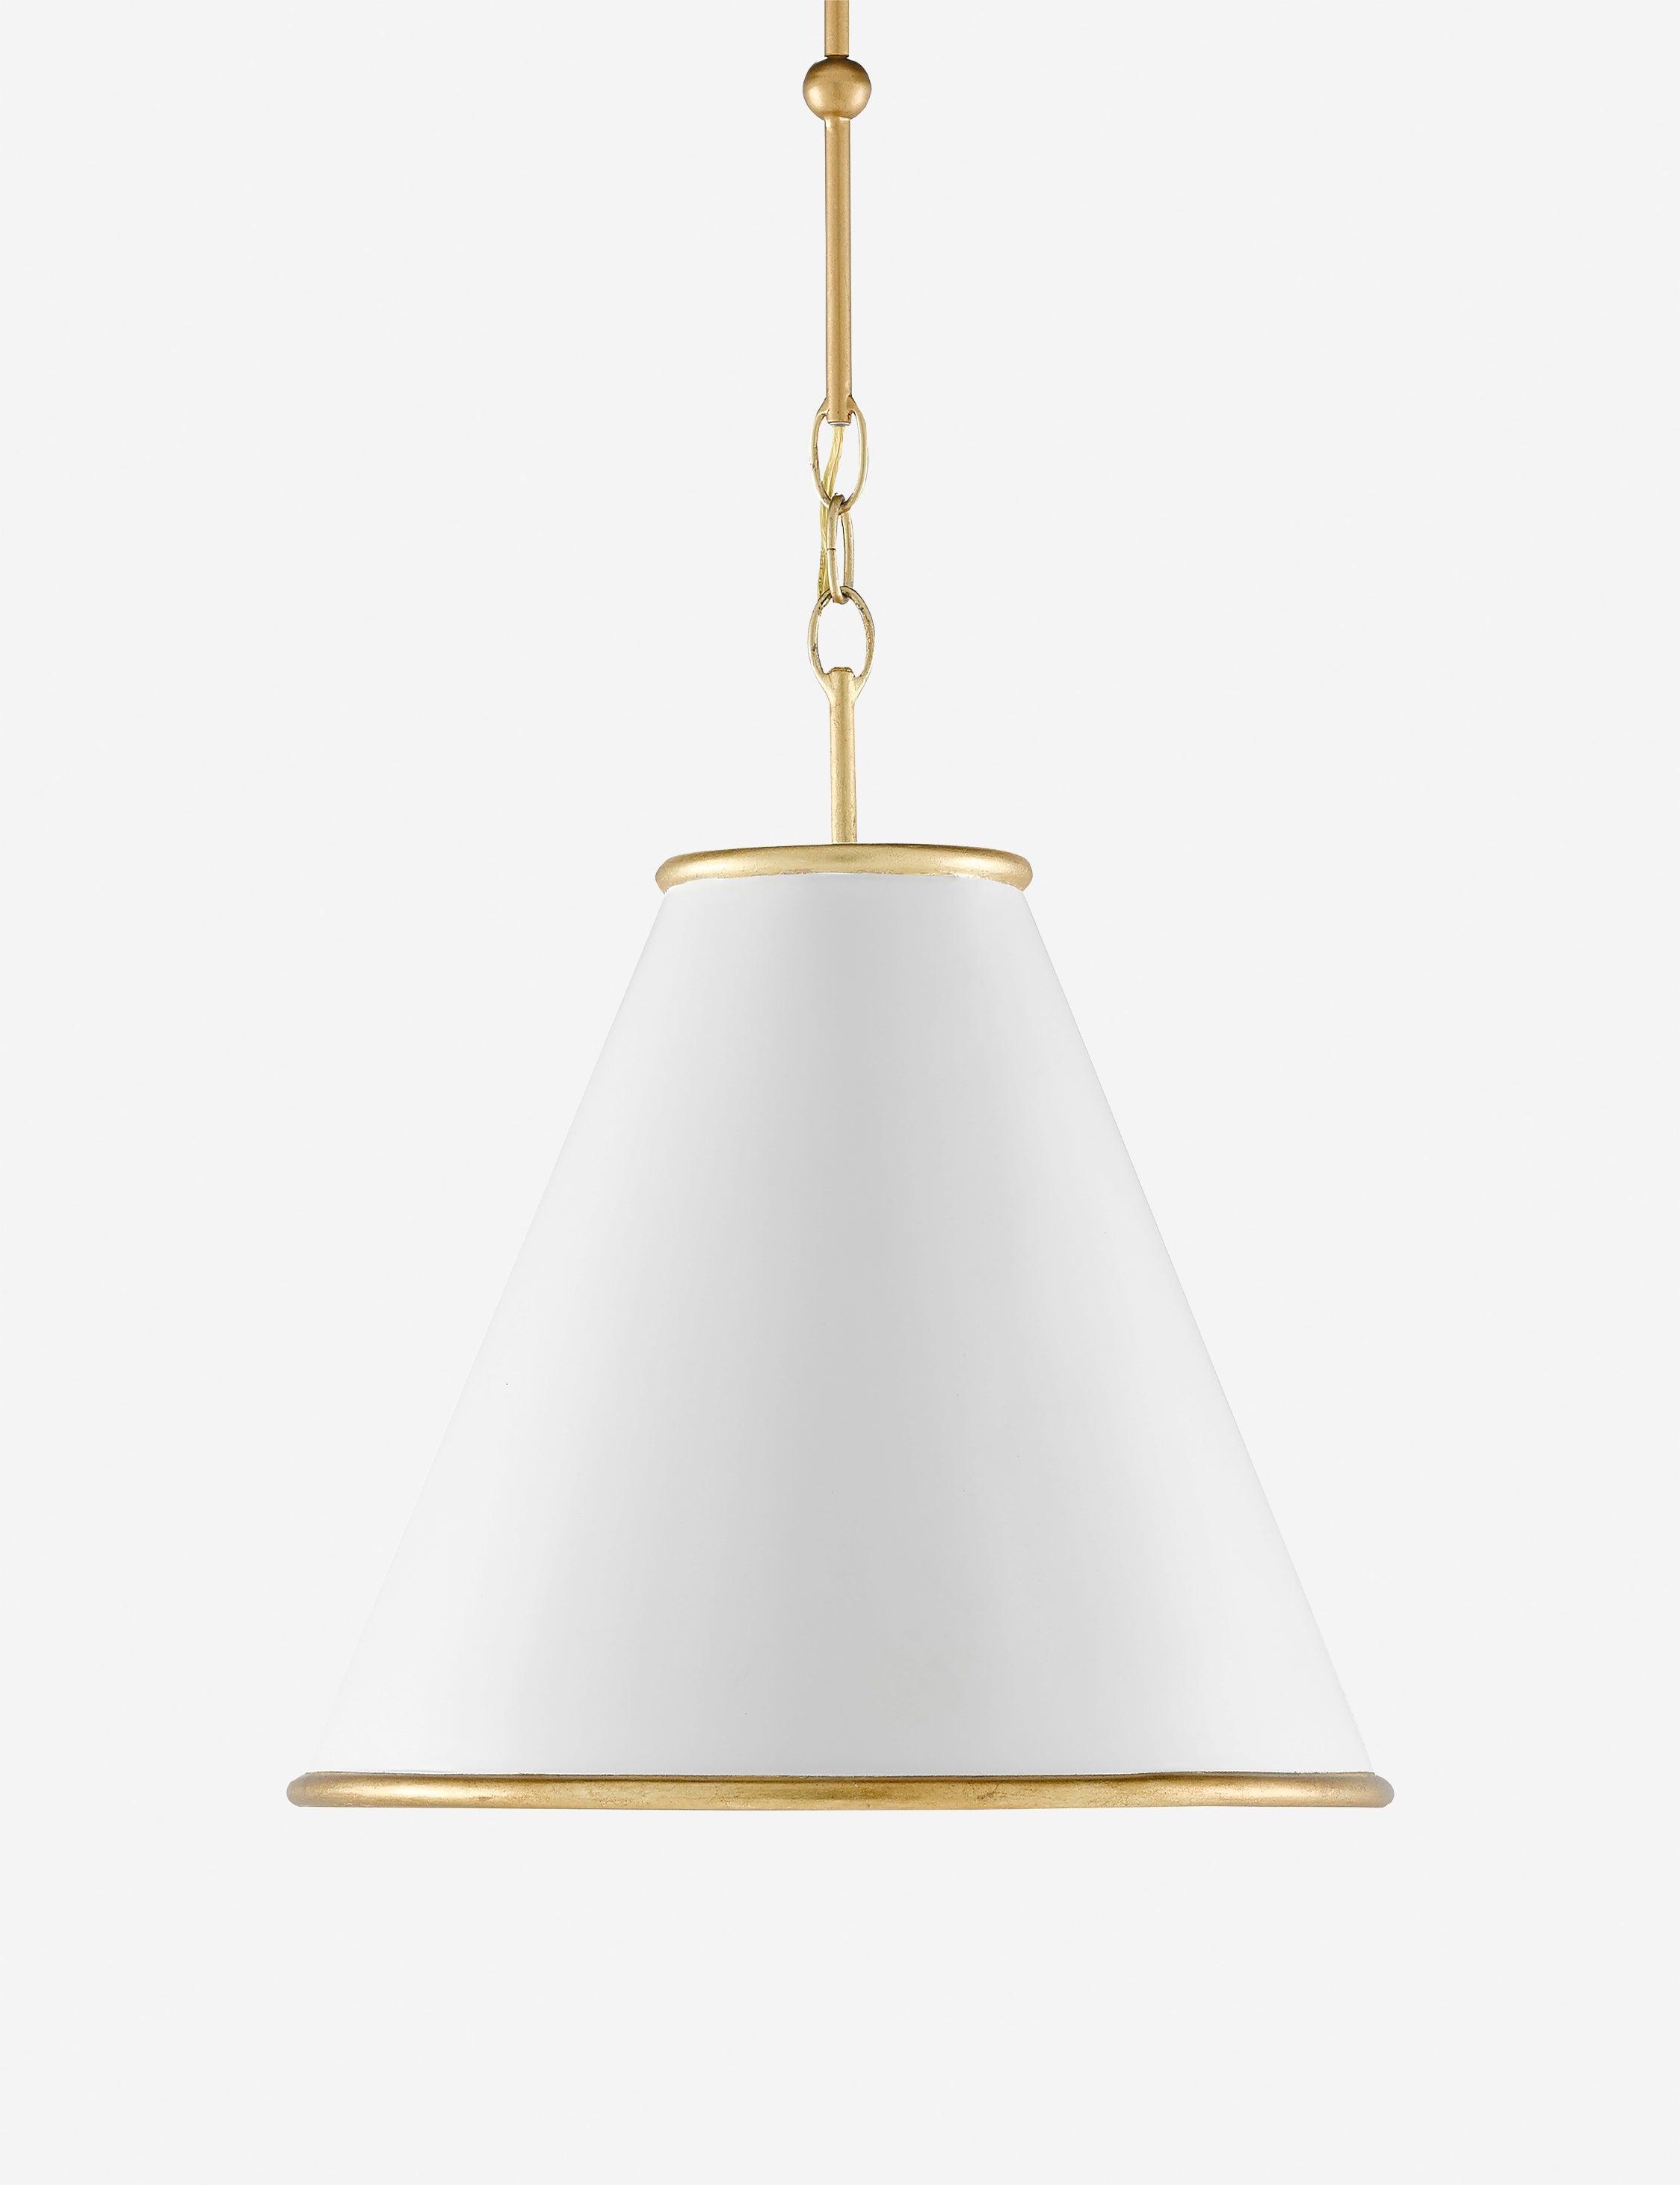 Adkins Adjustable Height Gold and White Cone Pendant Light